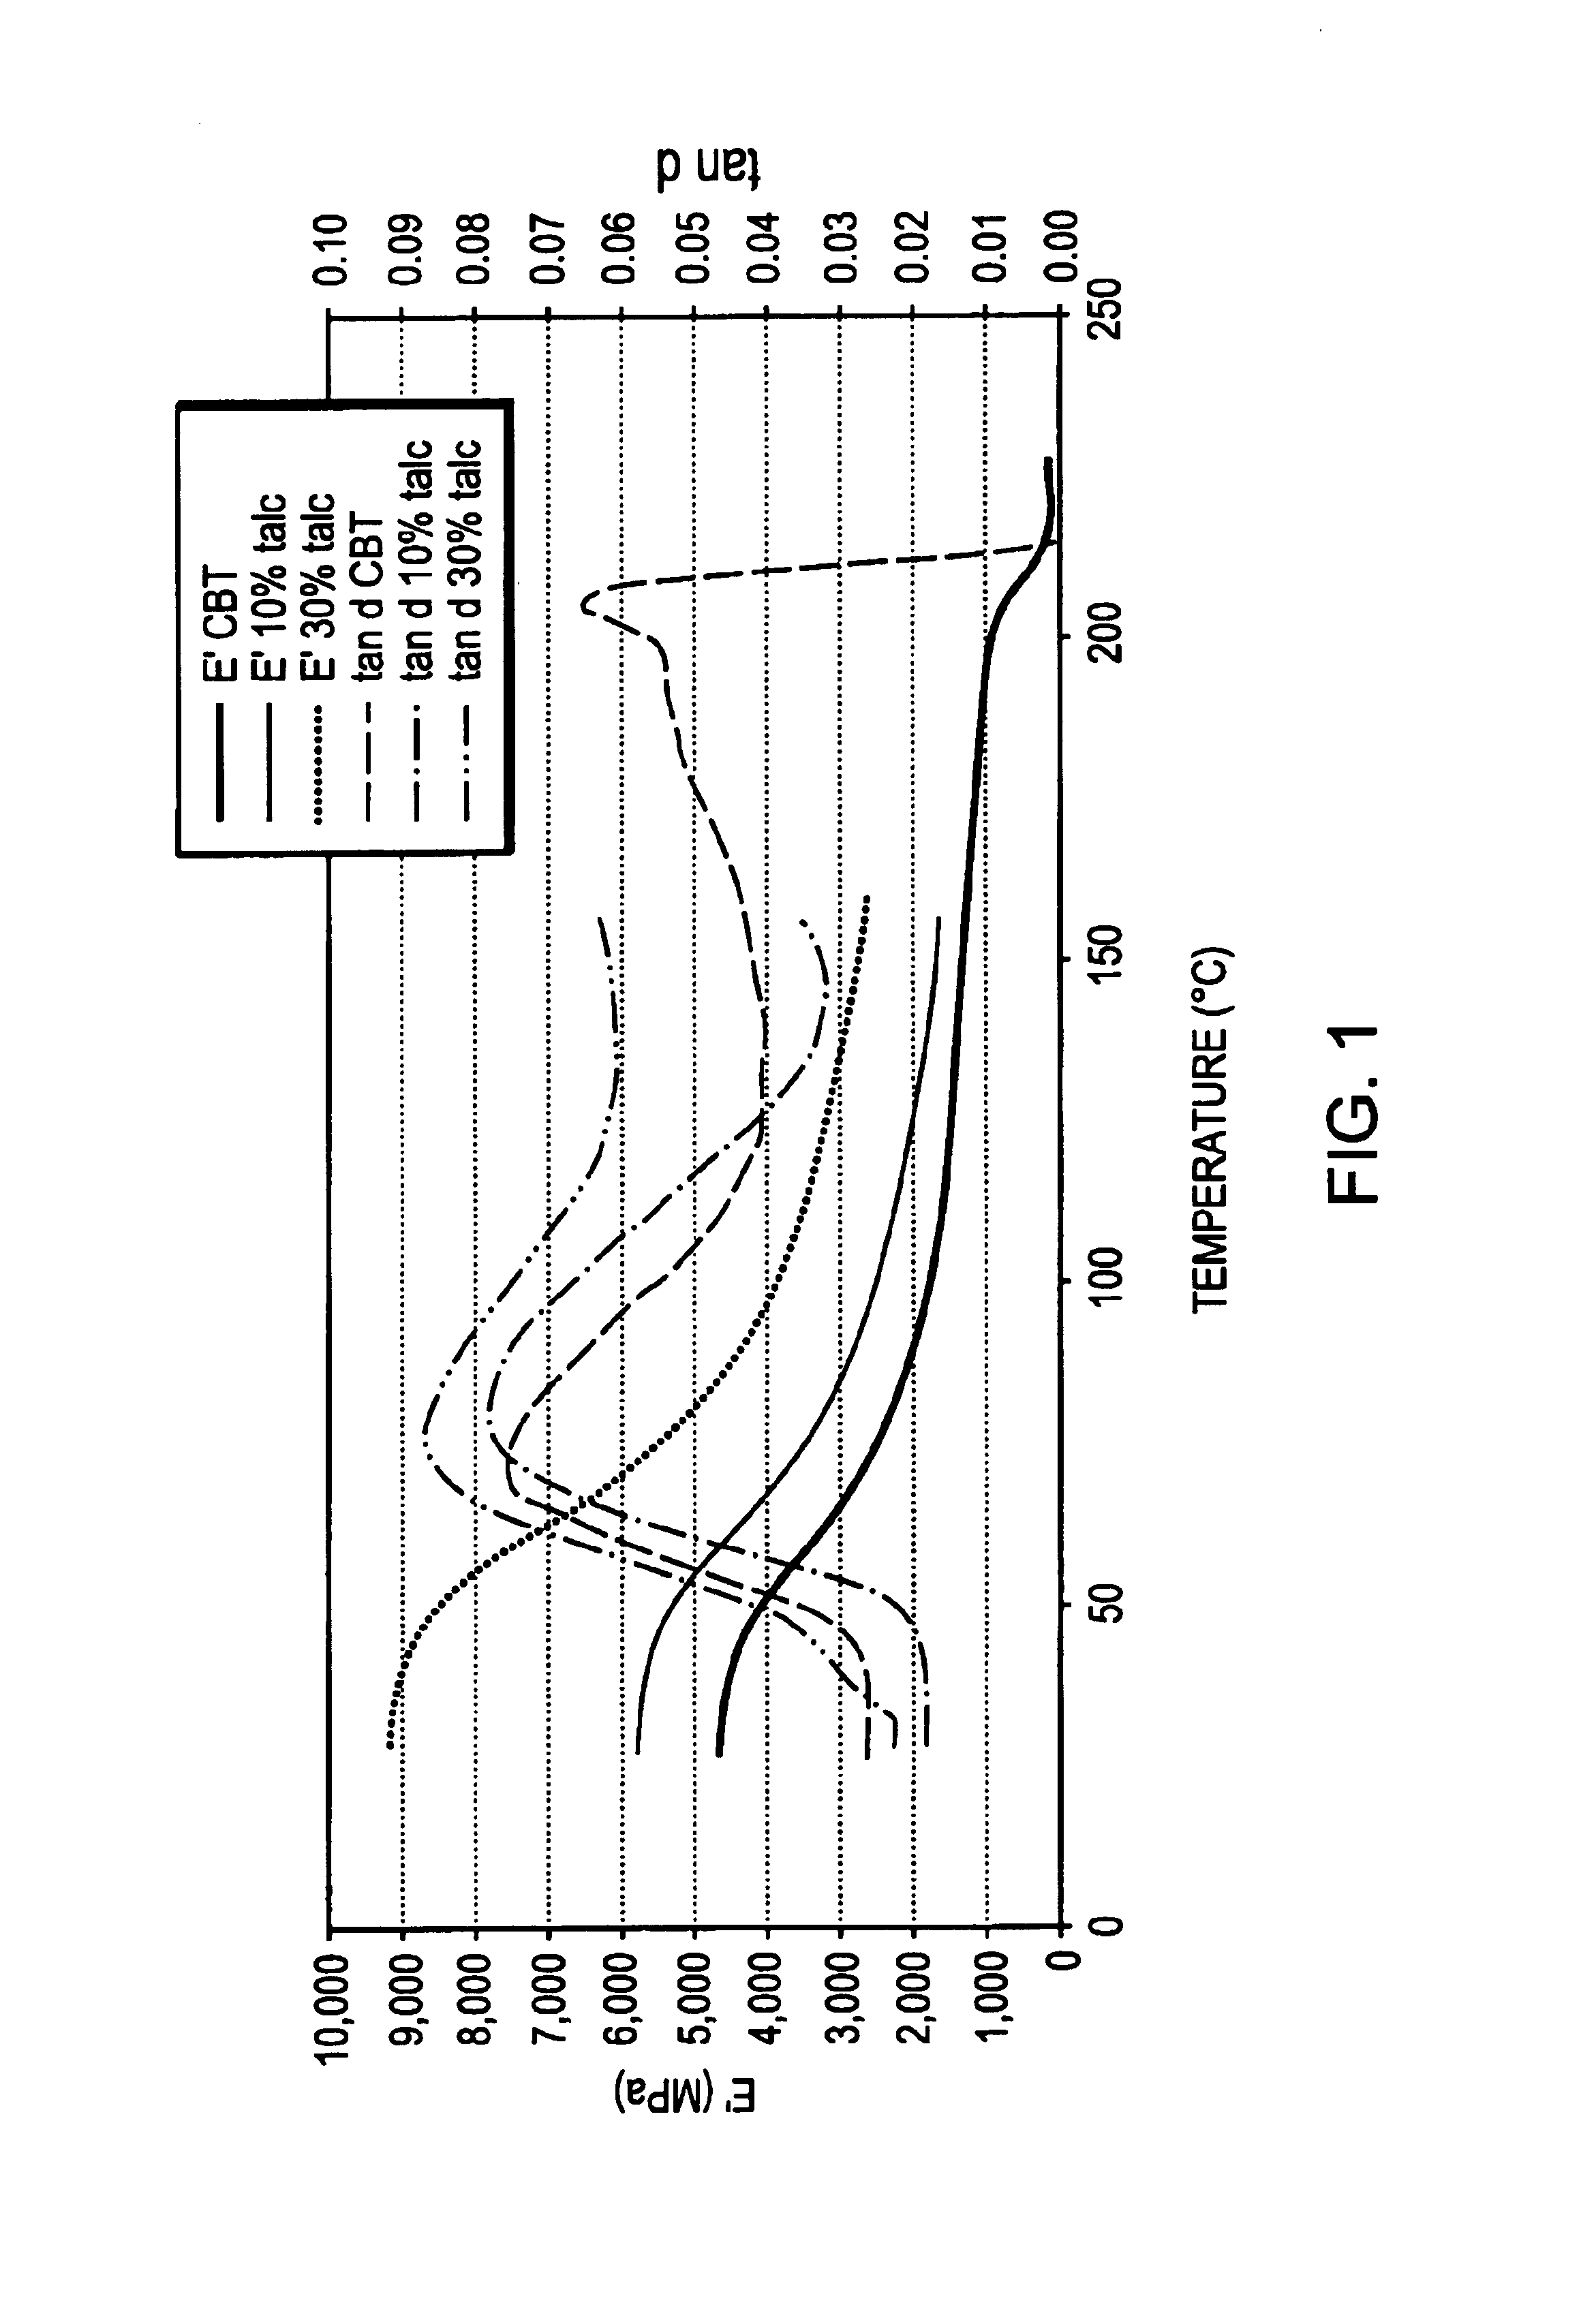 Intimate physical mixtures containing macrocyclic polyester oligomer and filler